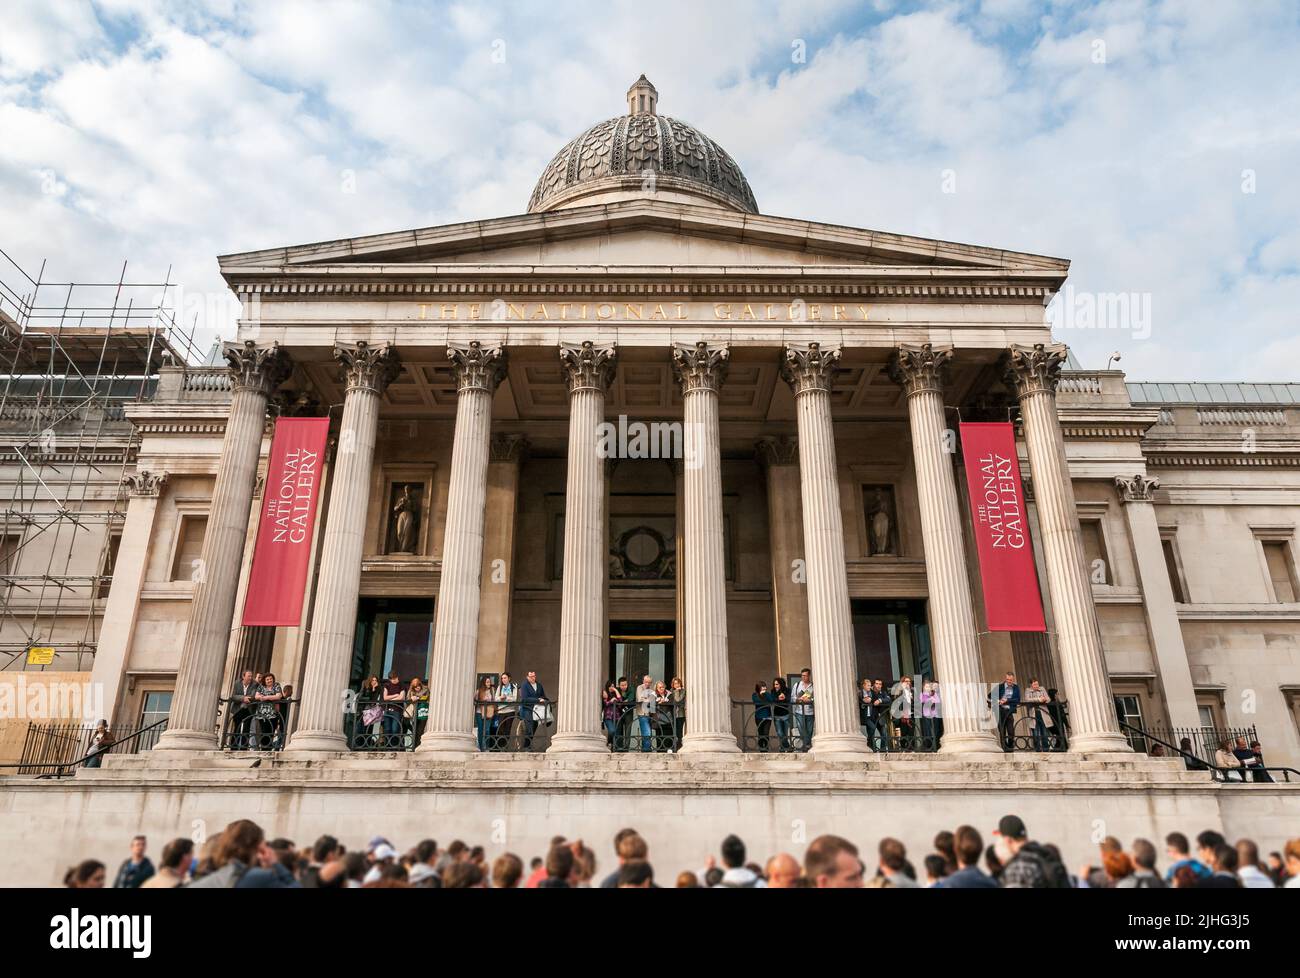 London, England, United Kingdom - September 26, 2013: People visiting the National Gallery in the Trafalgar Square in central London. Stock Photo